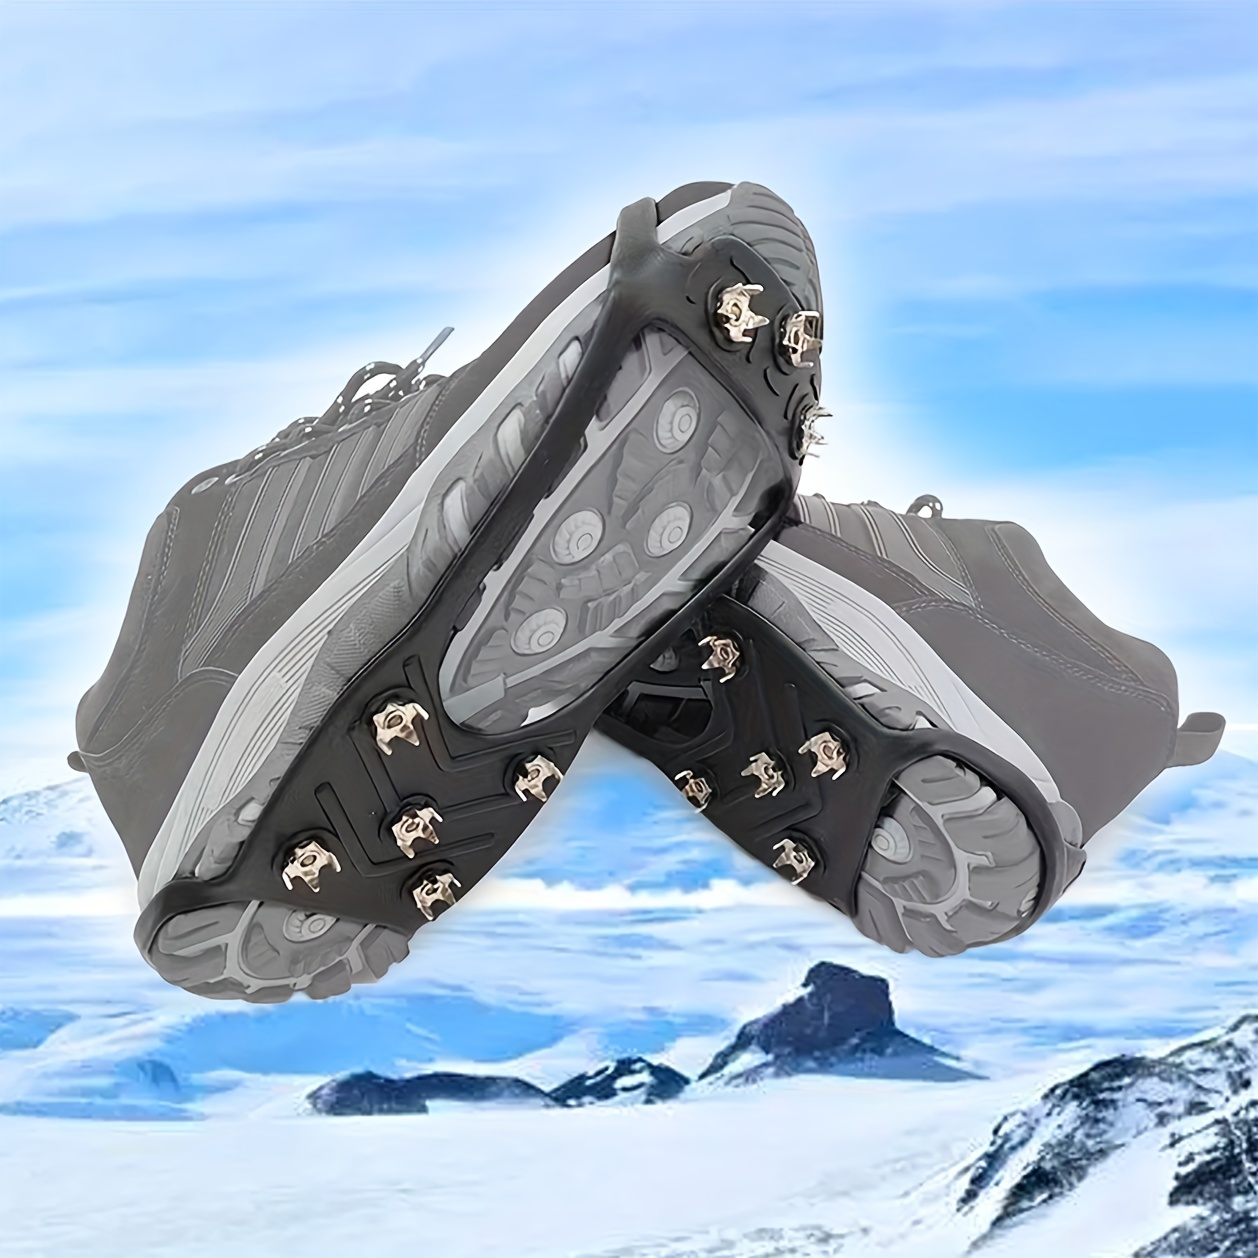 Cimkiz Crampons Ice Cleats Traction Snow Grips for Boots Shoes Women Men Kids Anti Slip 19 Stainless Steel Spikes Safe Protect for Hiking Fishing